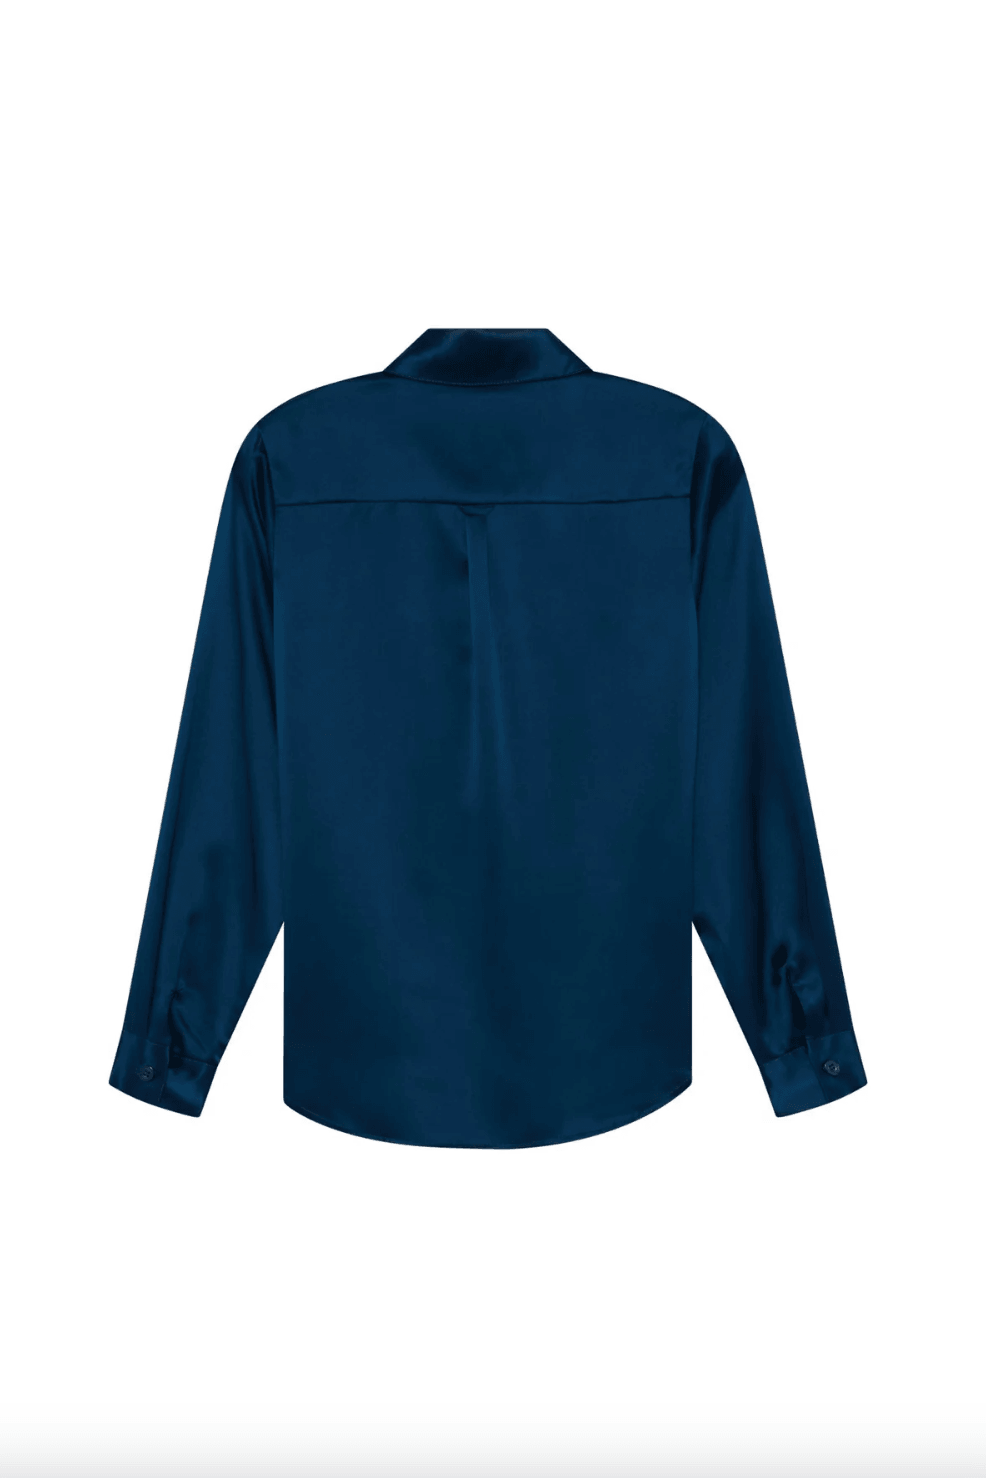 Sophie Blouse in Cerulean Blue by Catherine Gee - Haven